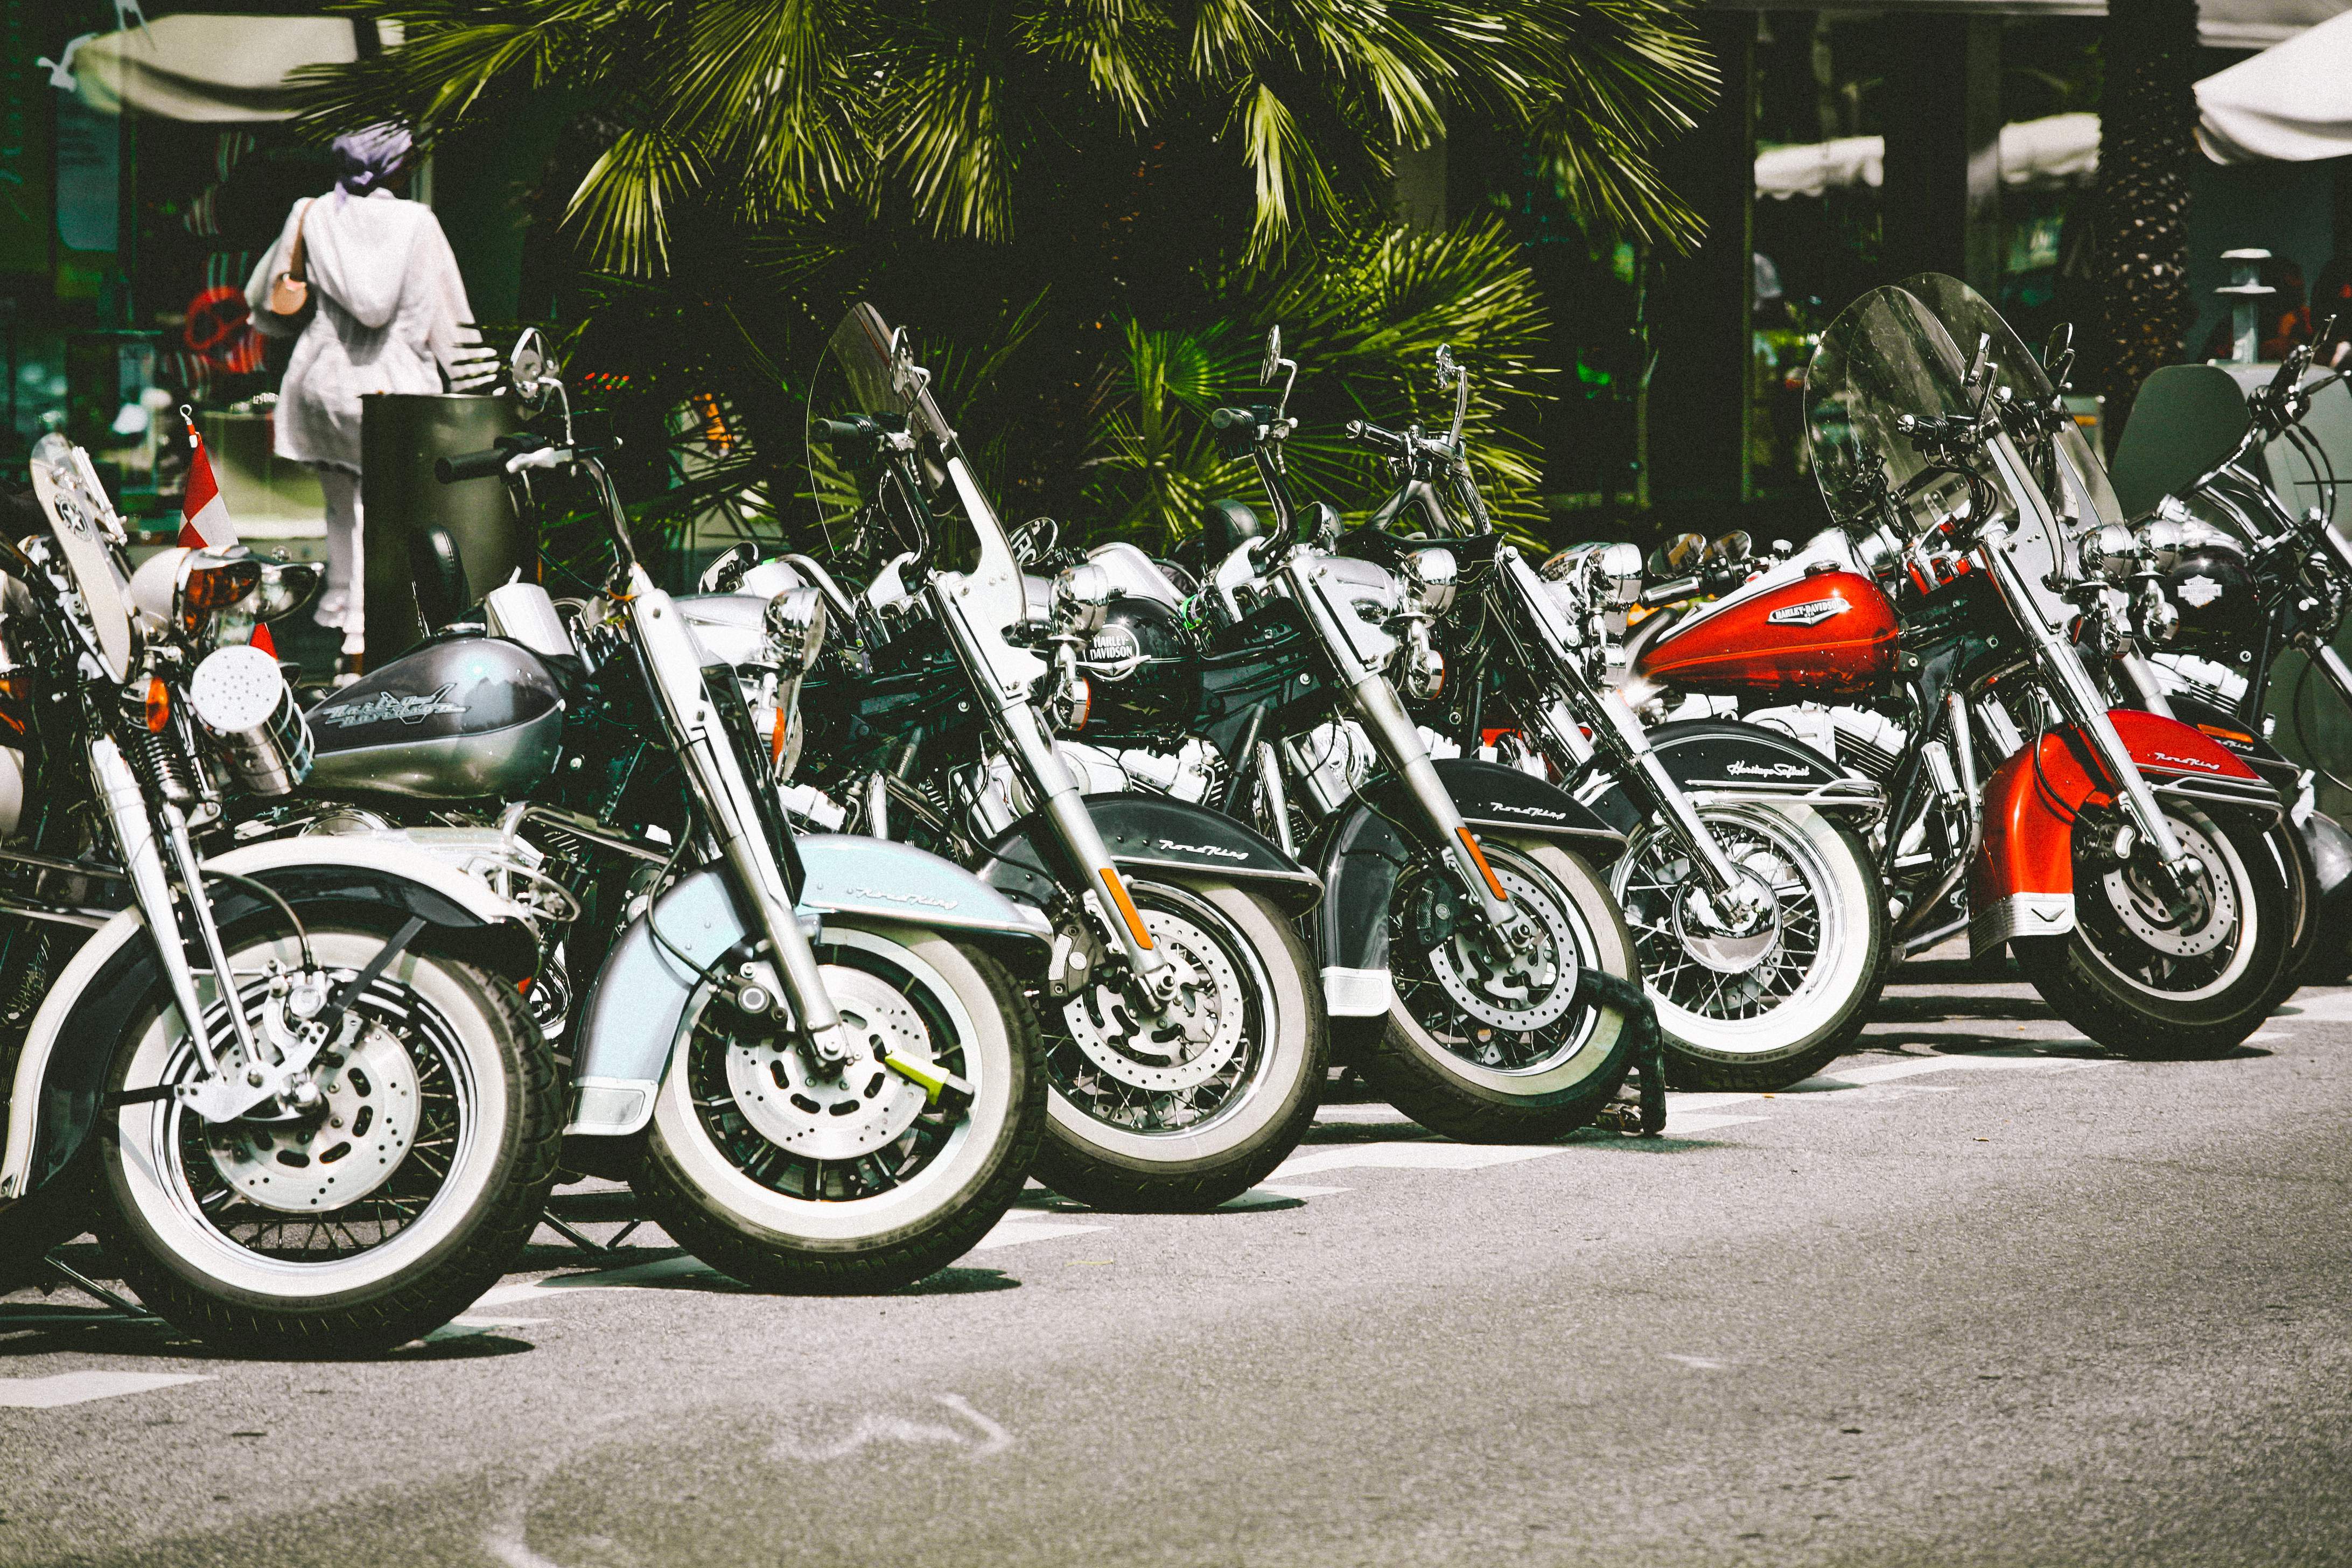 The thought of teens riding around on motorcycles strikes fear in the heart of many parents and with good reason.